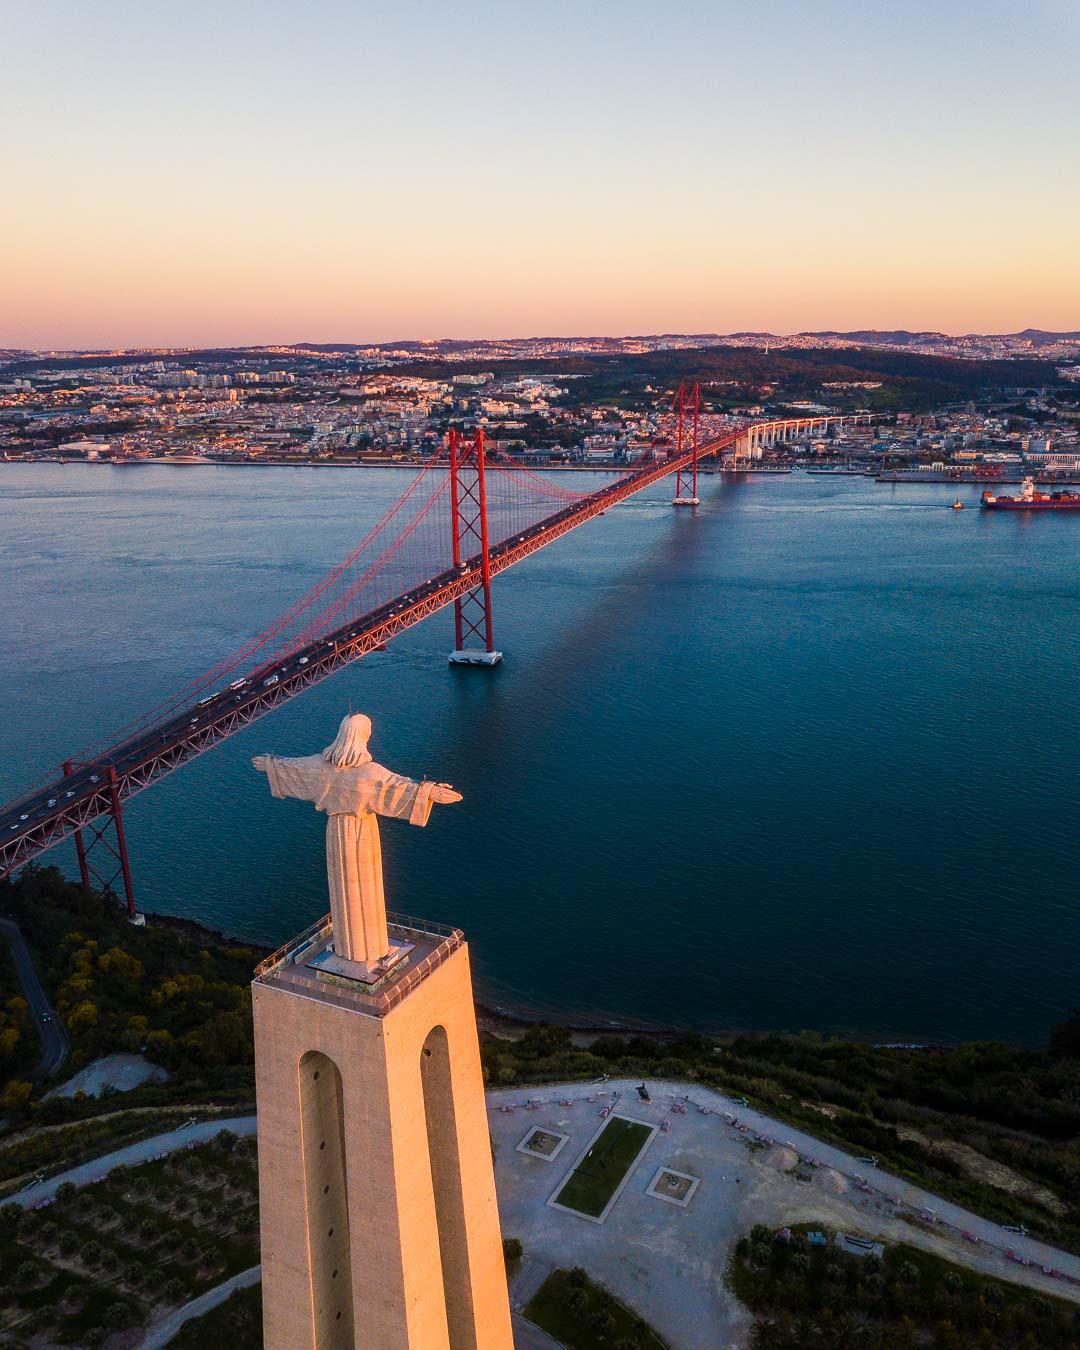 cristo rei is among the best portugal monuments